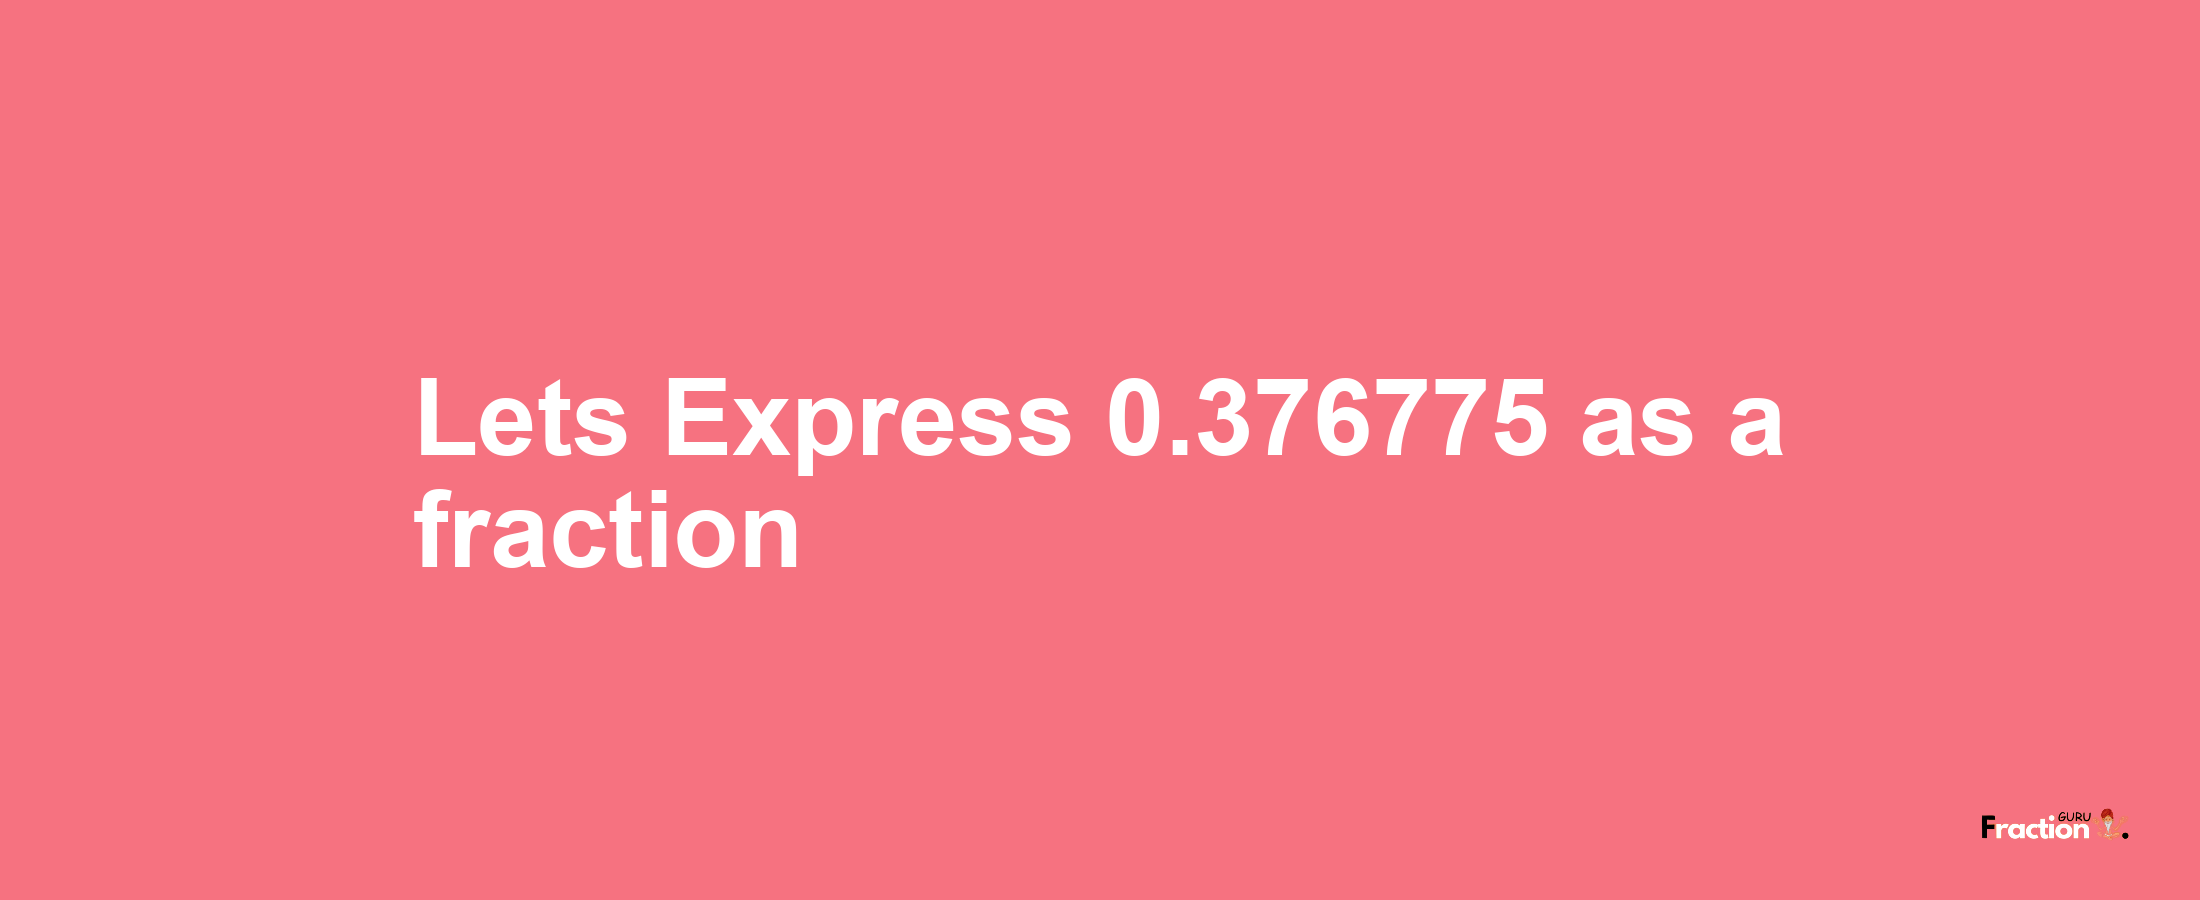 Lets Express 0.376775 as afraction